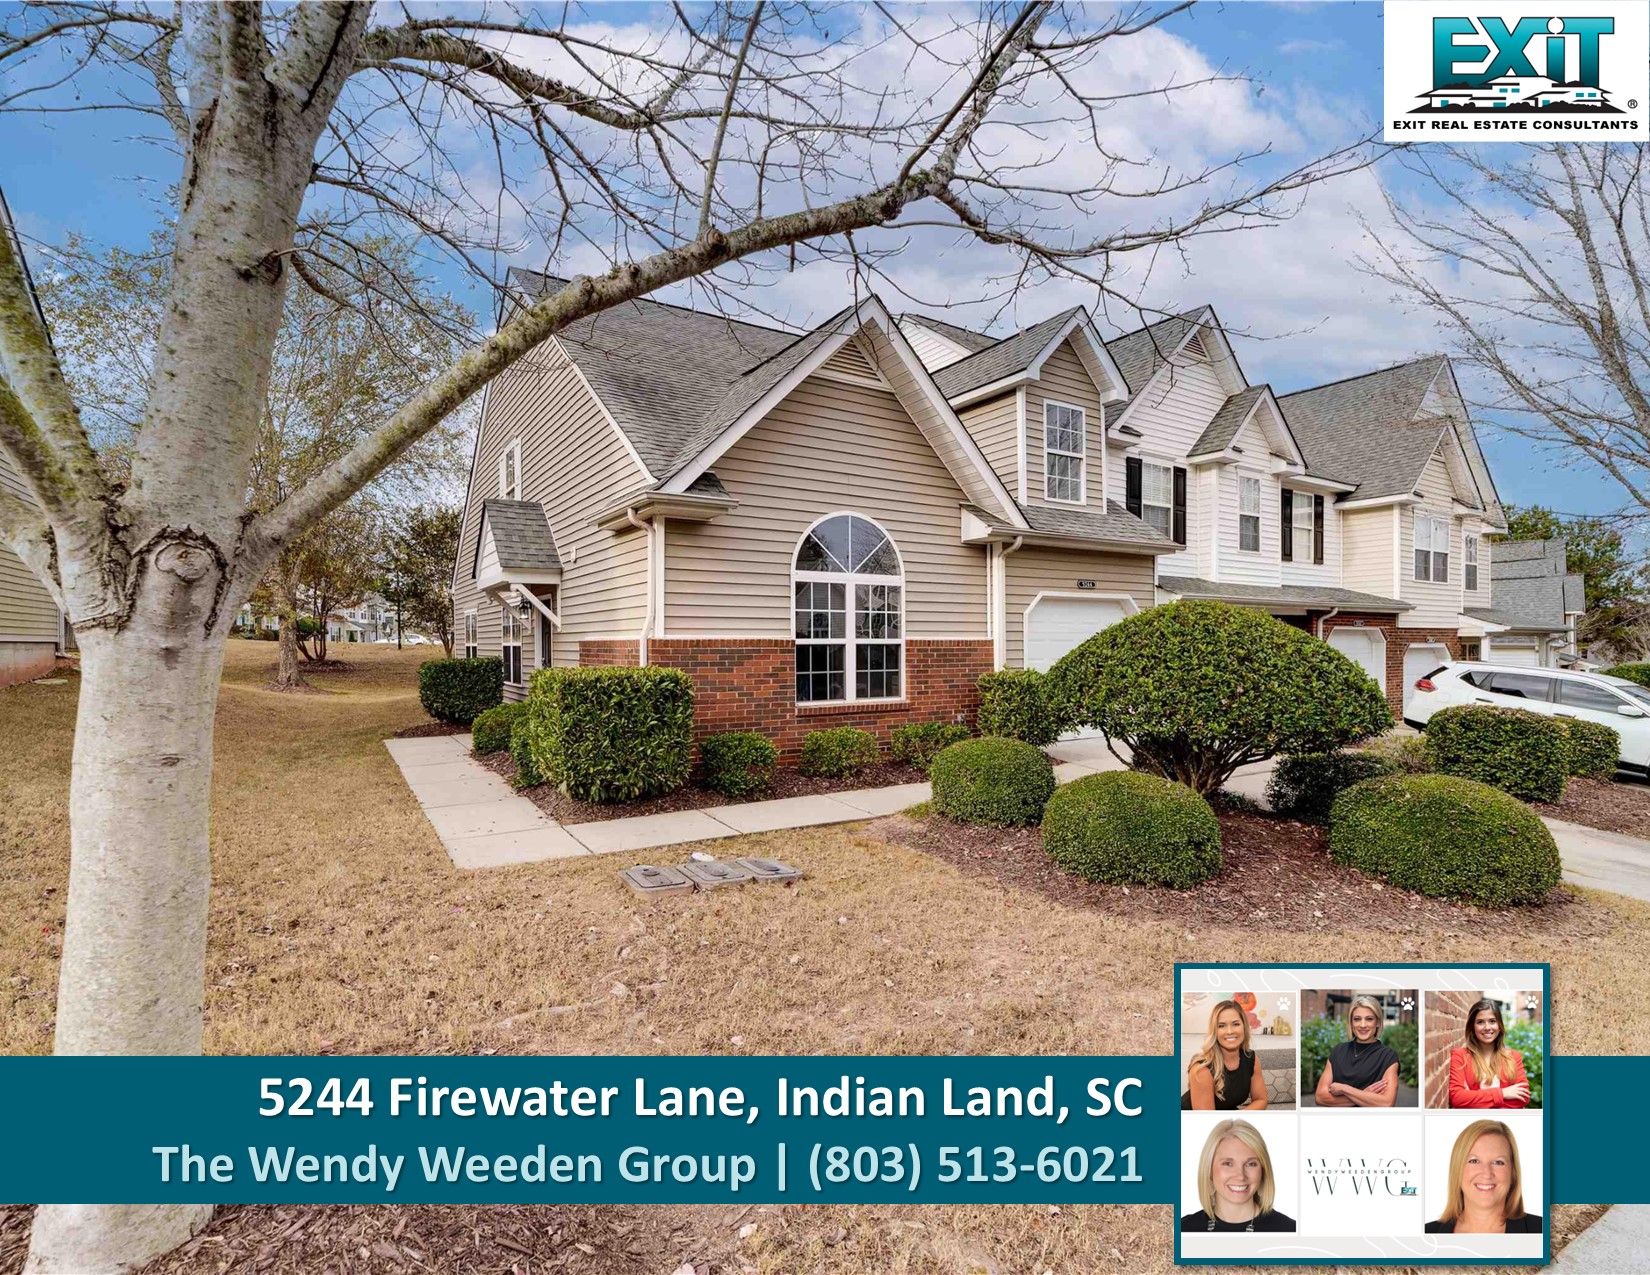 Just listed in Indian Land